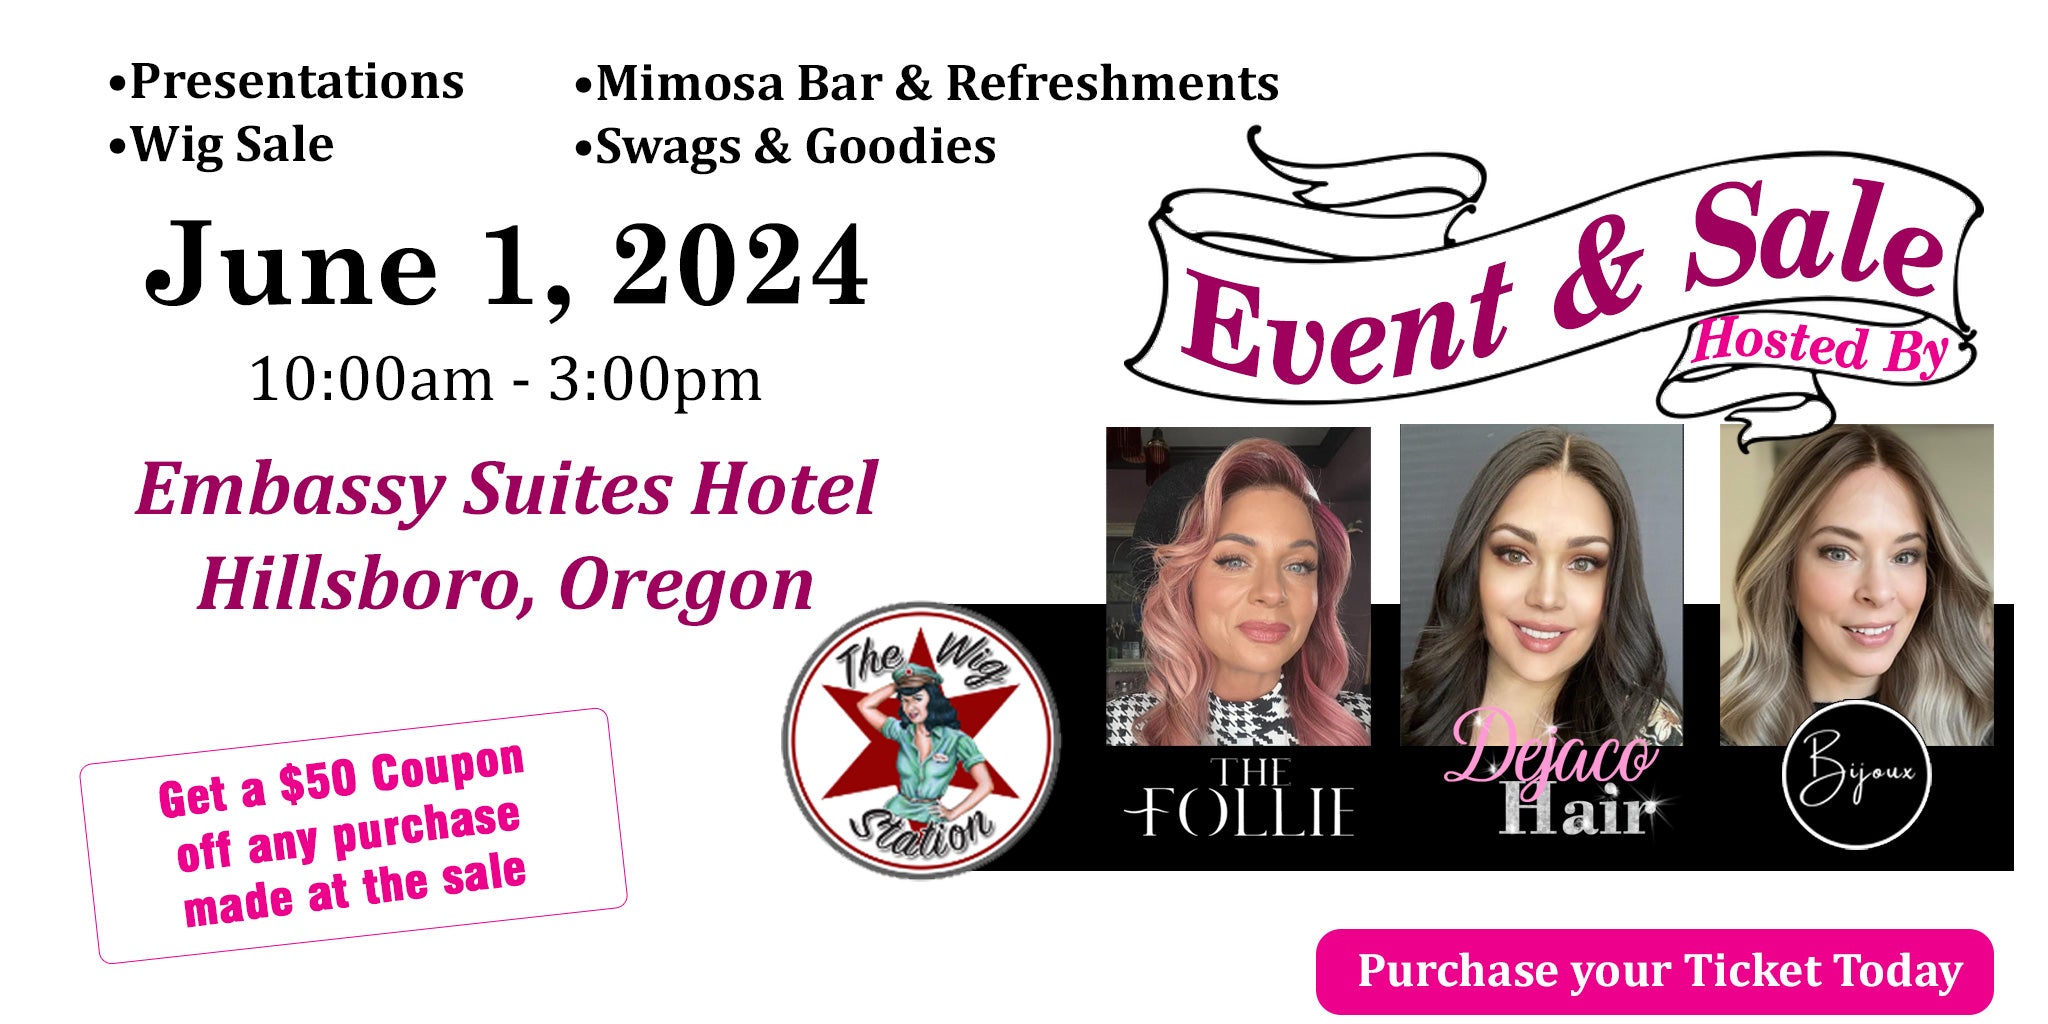 Huge Wig Sale and Event in Hillsboro Oregon on June 1, 2024 - $50 coupon with each ticket